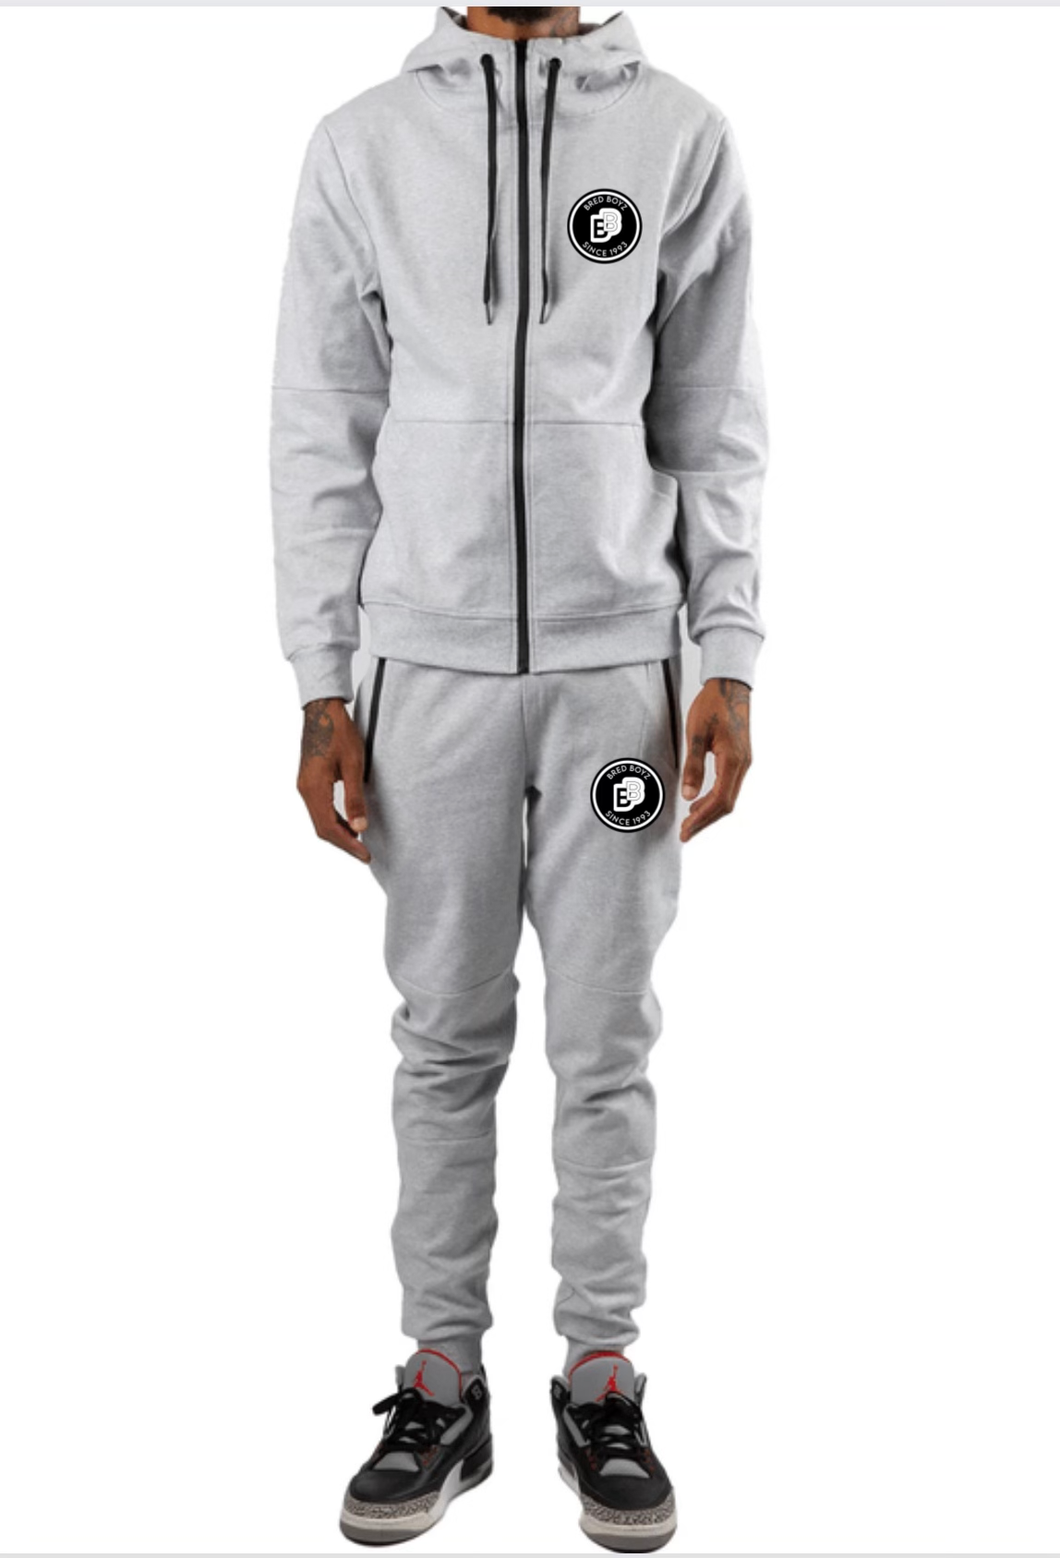 Bred Boyz Gray Embroidered Tech Jogger Fit Fleece with Hoodie